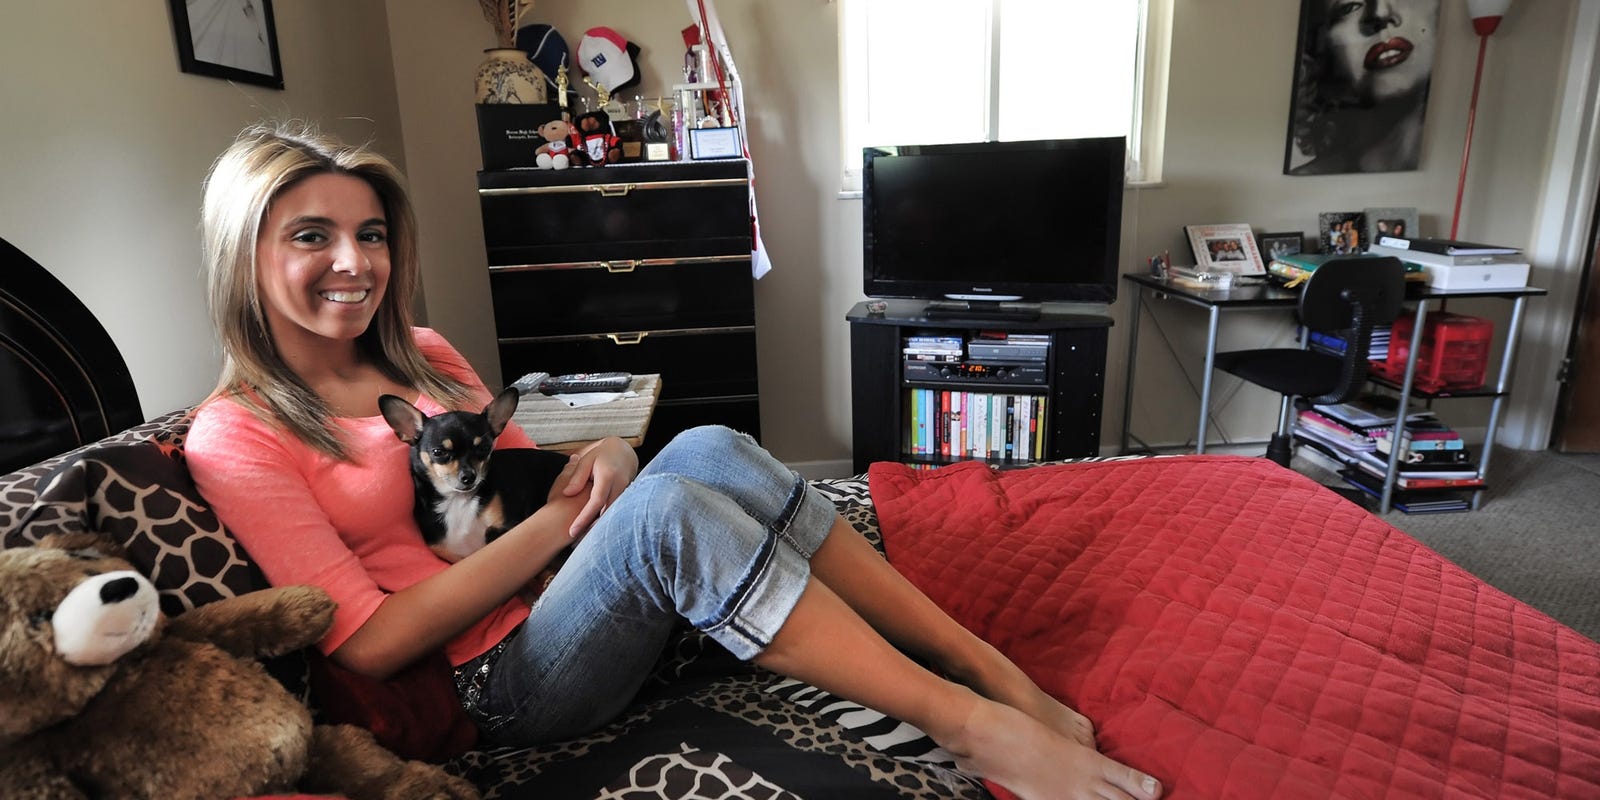 Teen hopes her story of living with HIV helps